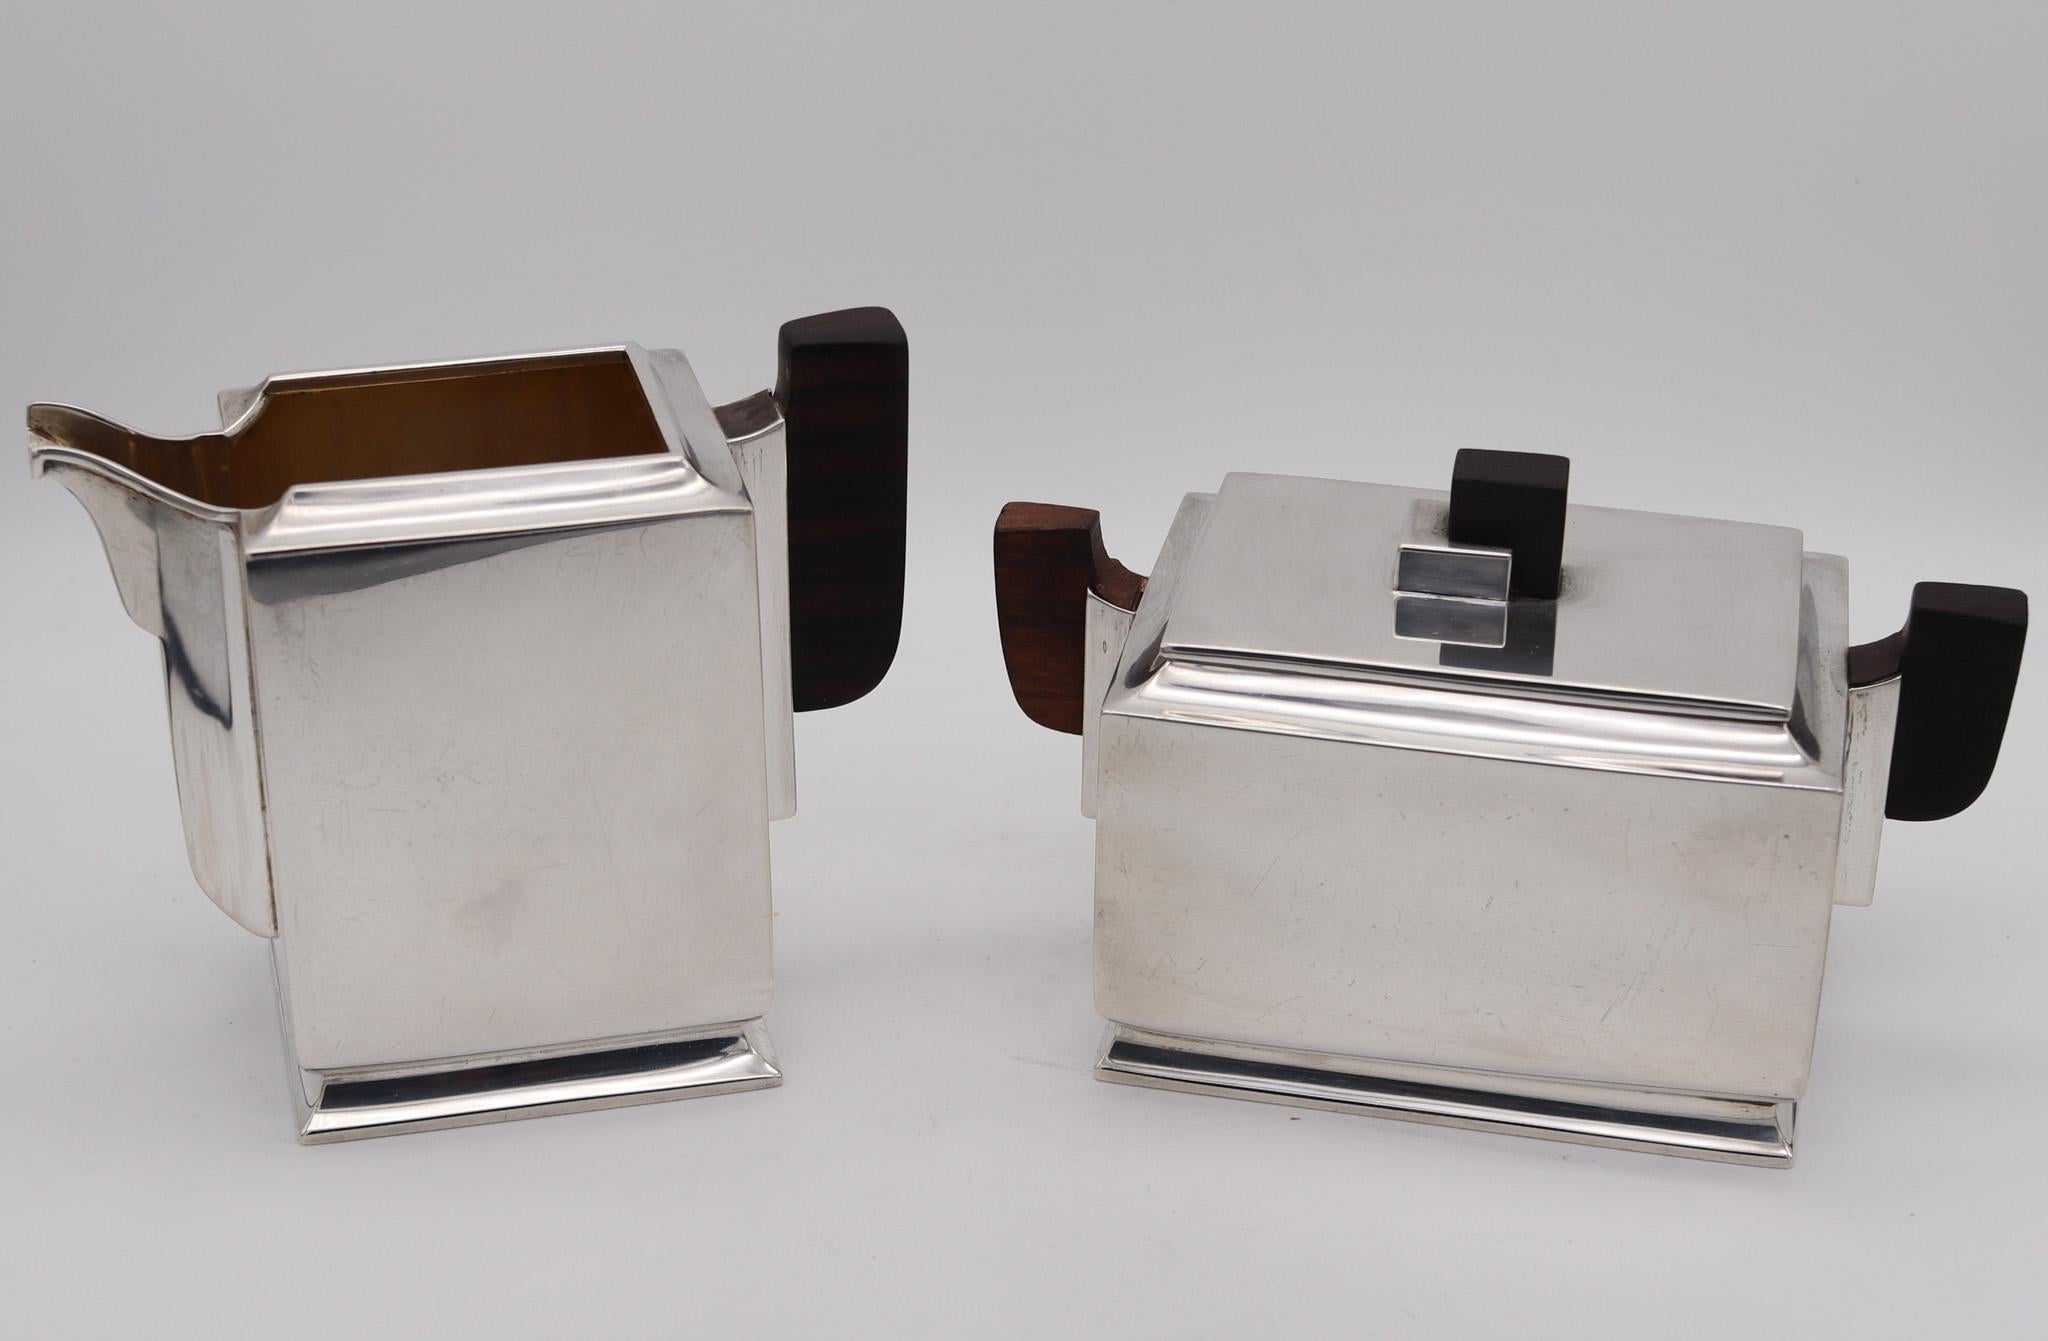 Sweden 1931 Art Deco Bauhaus Geometric Coffee Set In Sterling Silver And Ebony For Sale 1